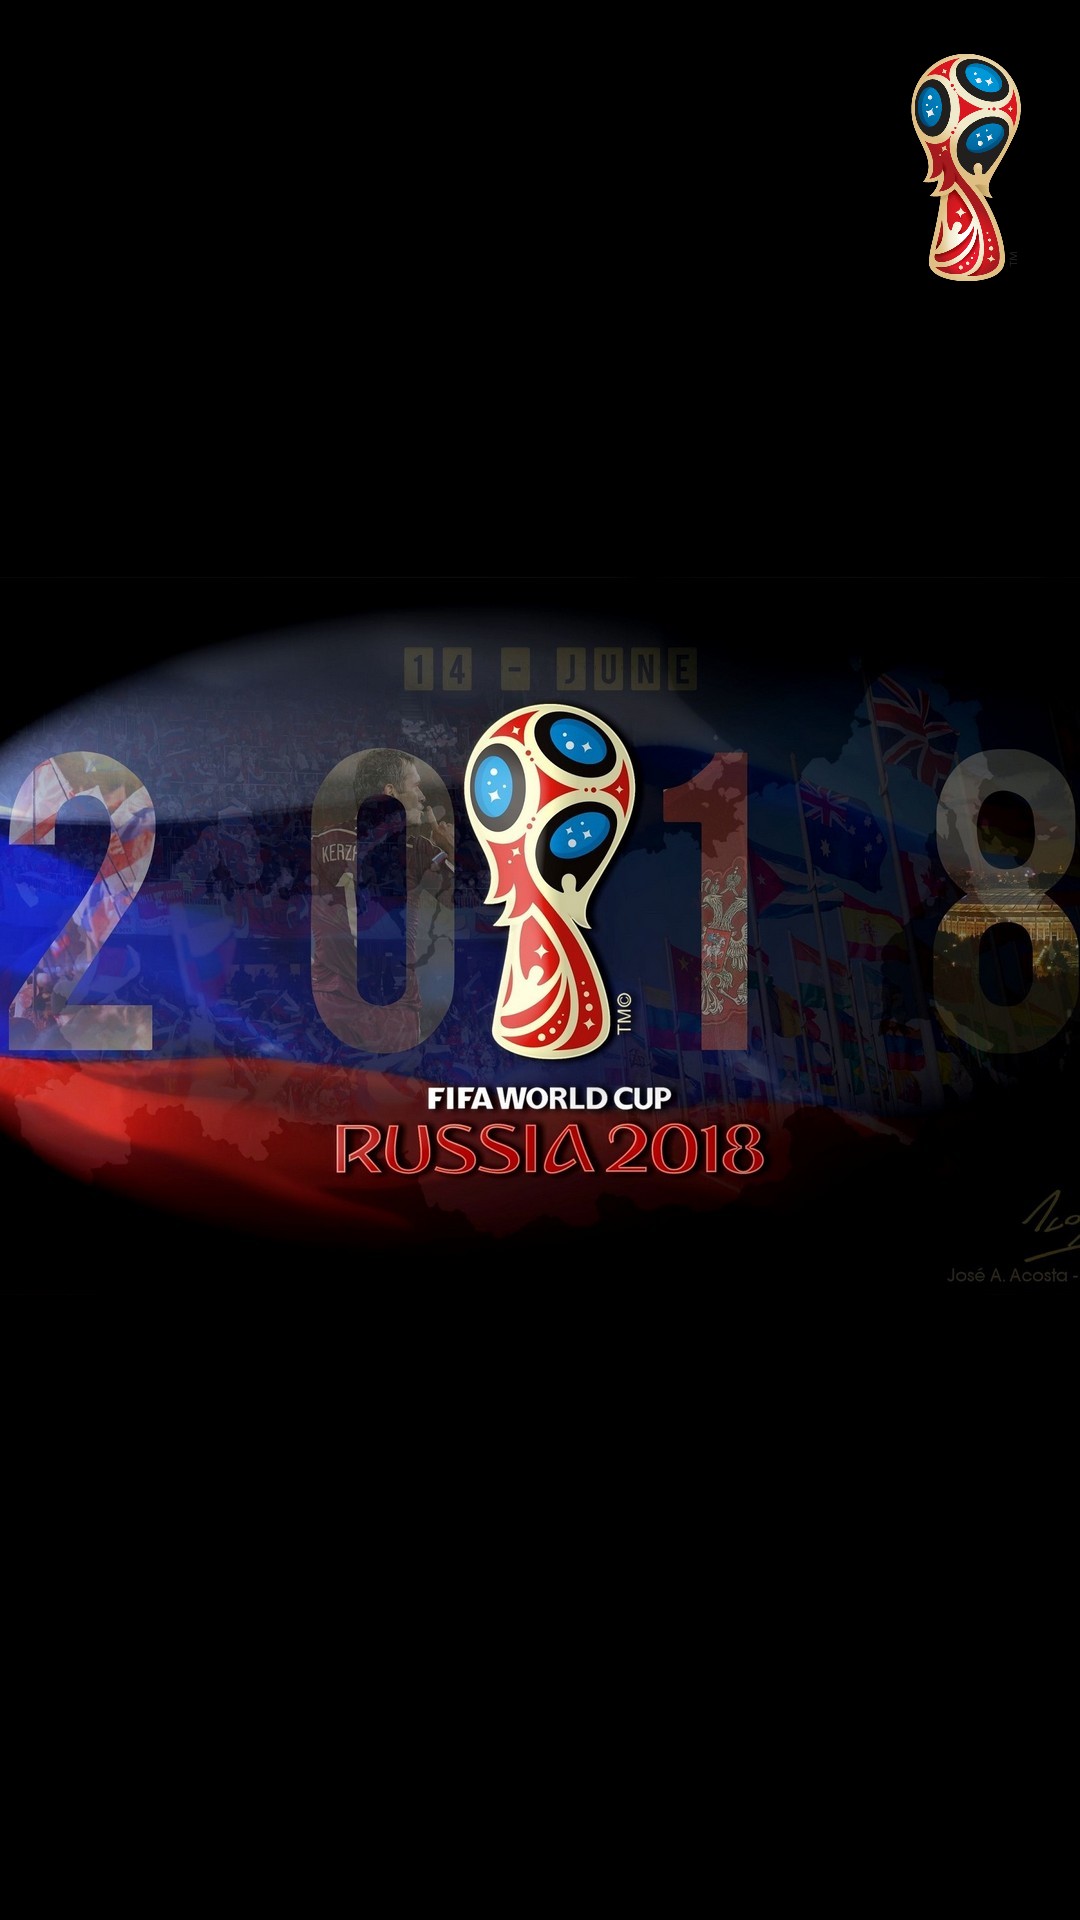 FIFA World Cup Wallpaper iPhone HD With Resolution 1080X1920 pixel. You can make this wallpaper for your Mac or Windows Desktop Background, iPhone, Android or Tablet and another Smartphone device for free